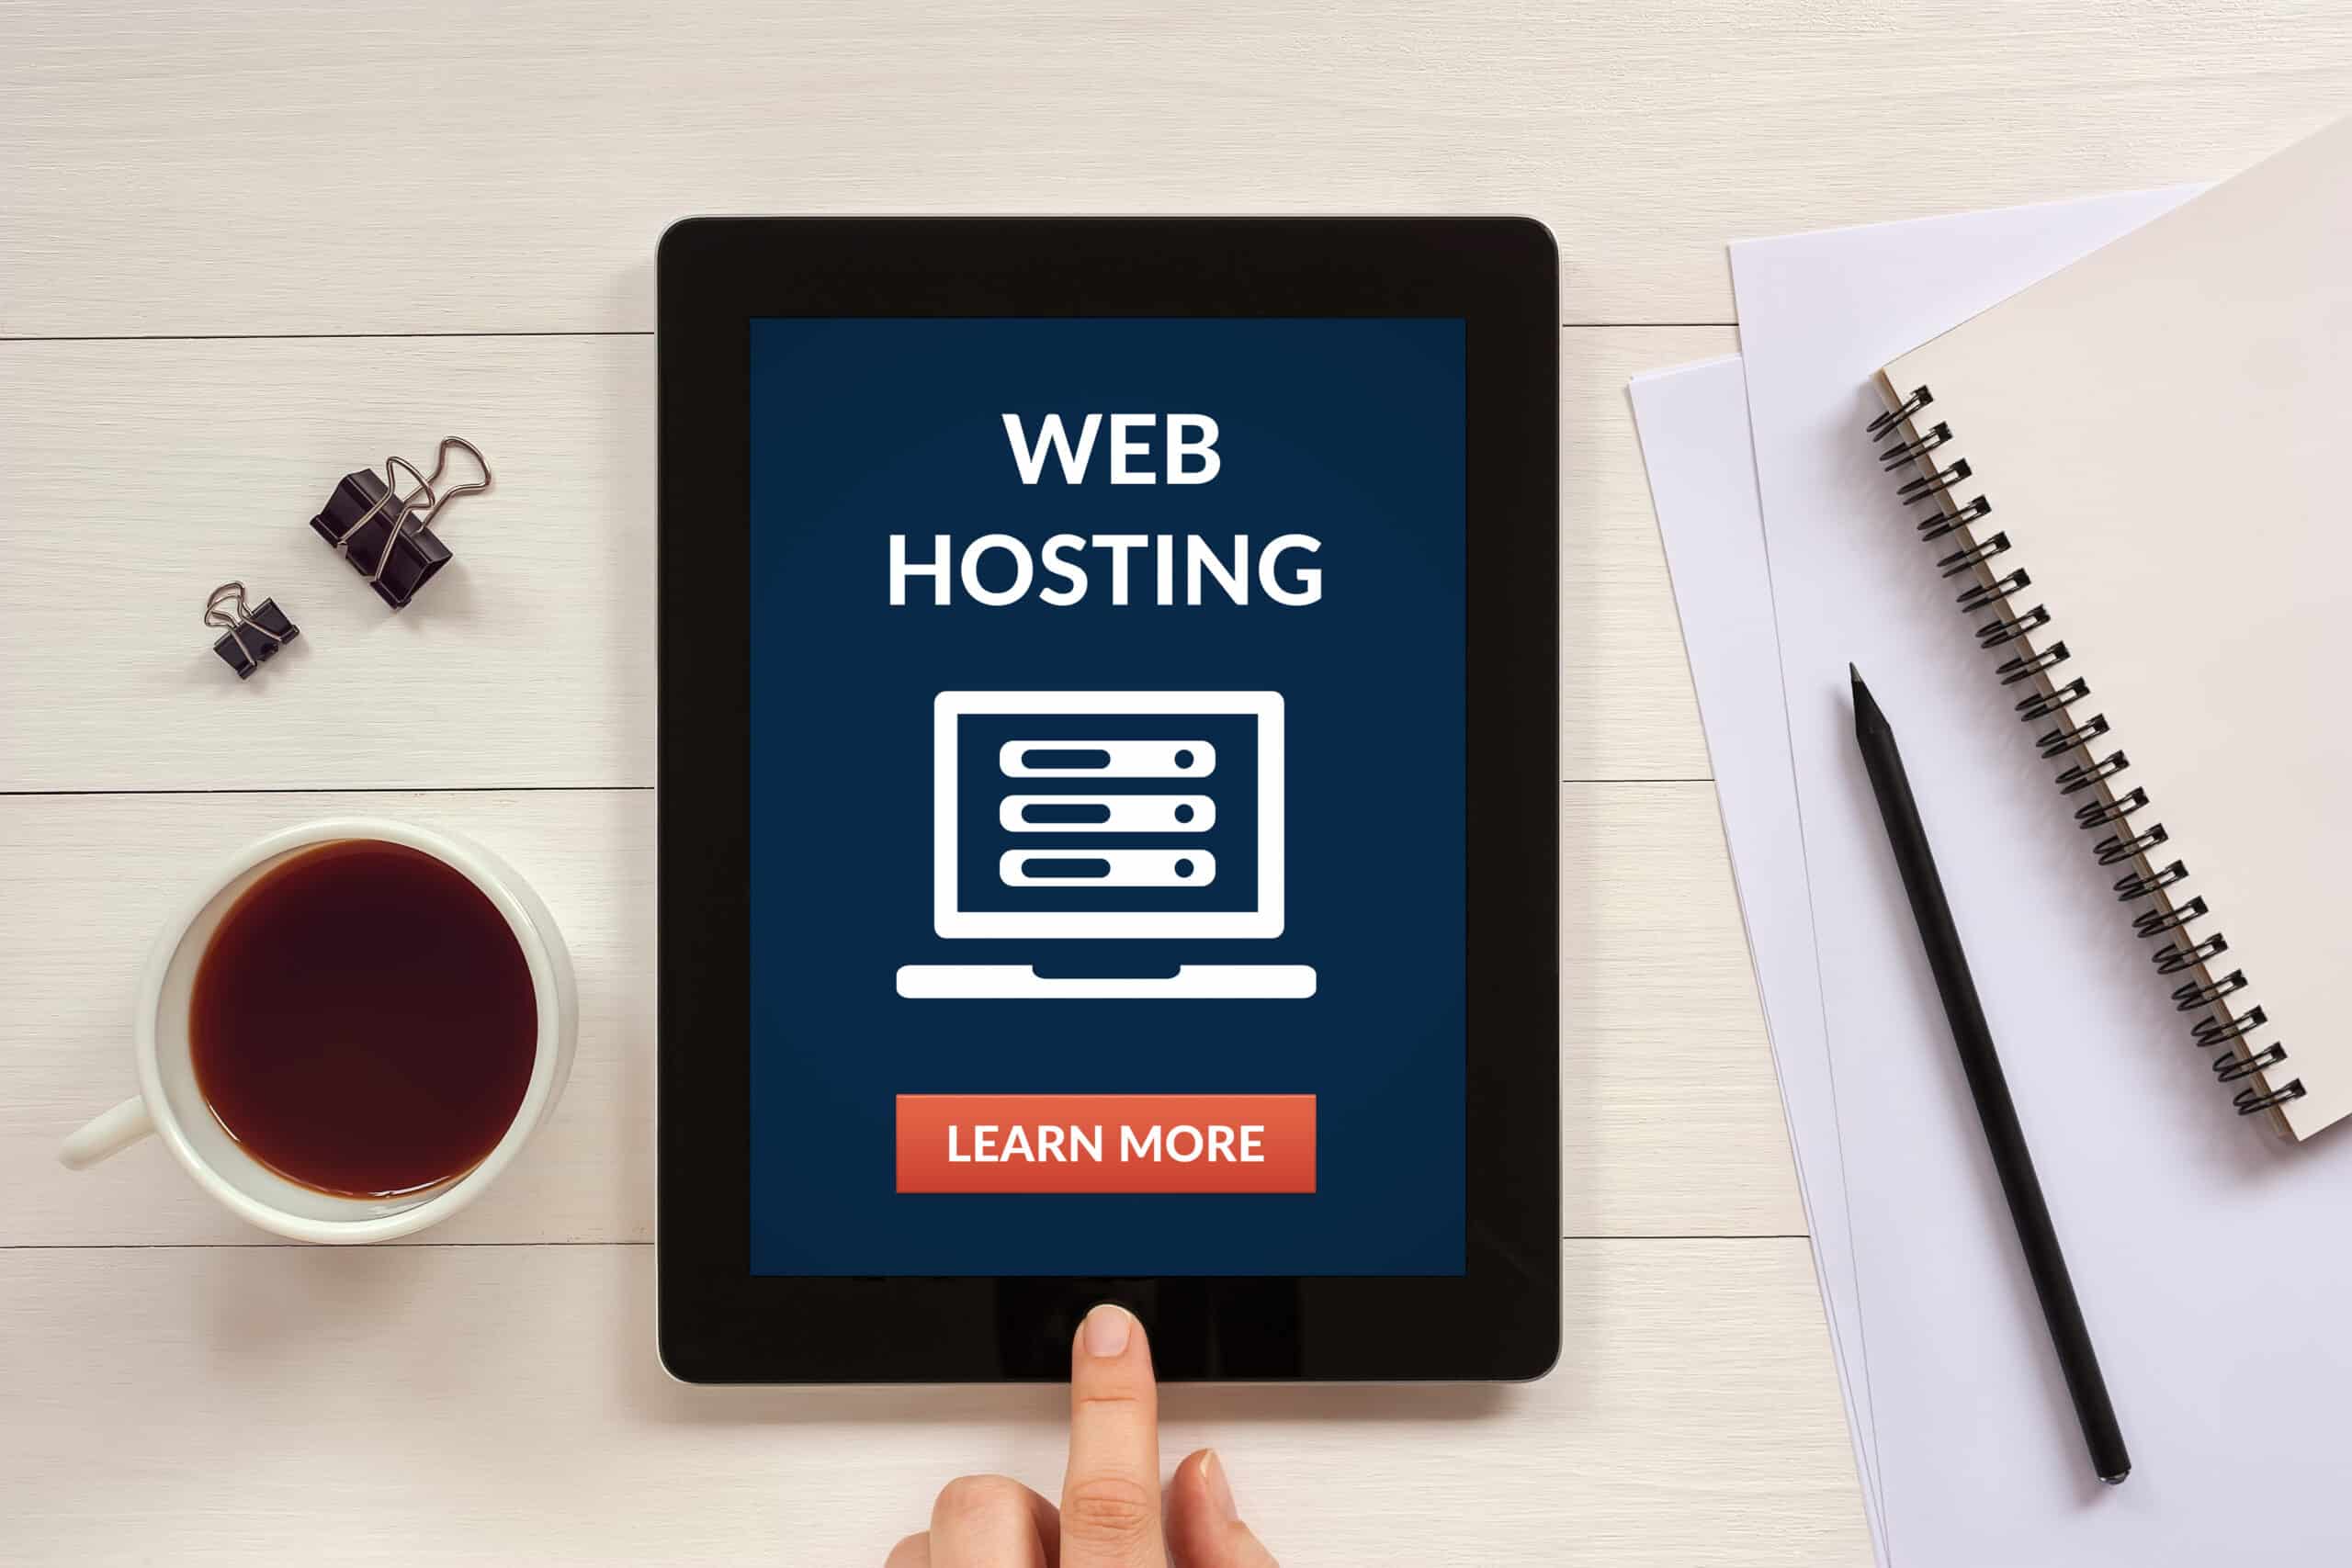 What are the Best Web Hosting Services for Small Businesses?